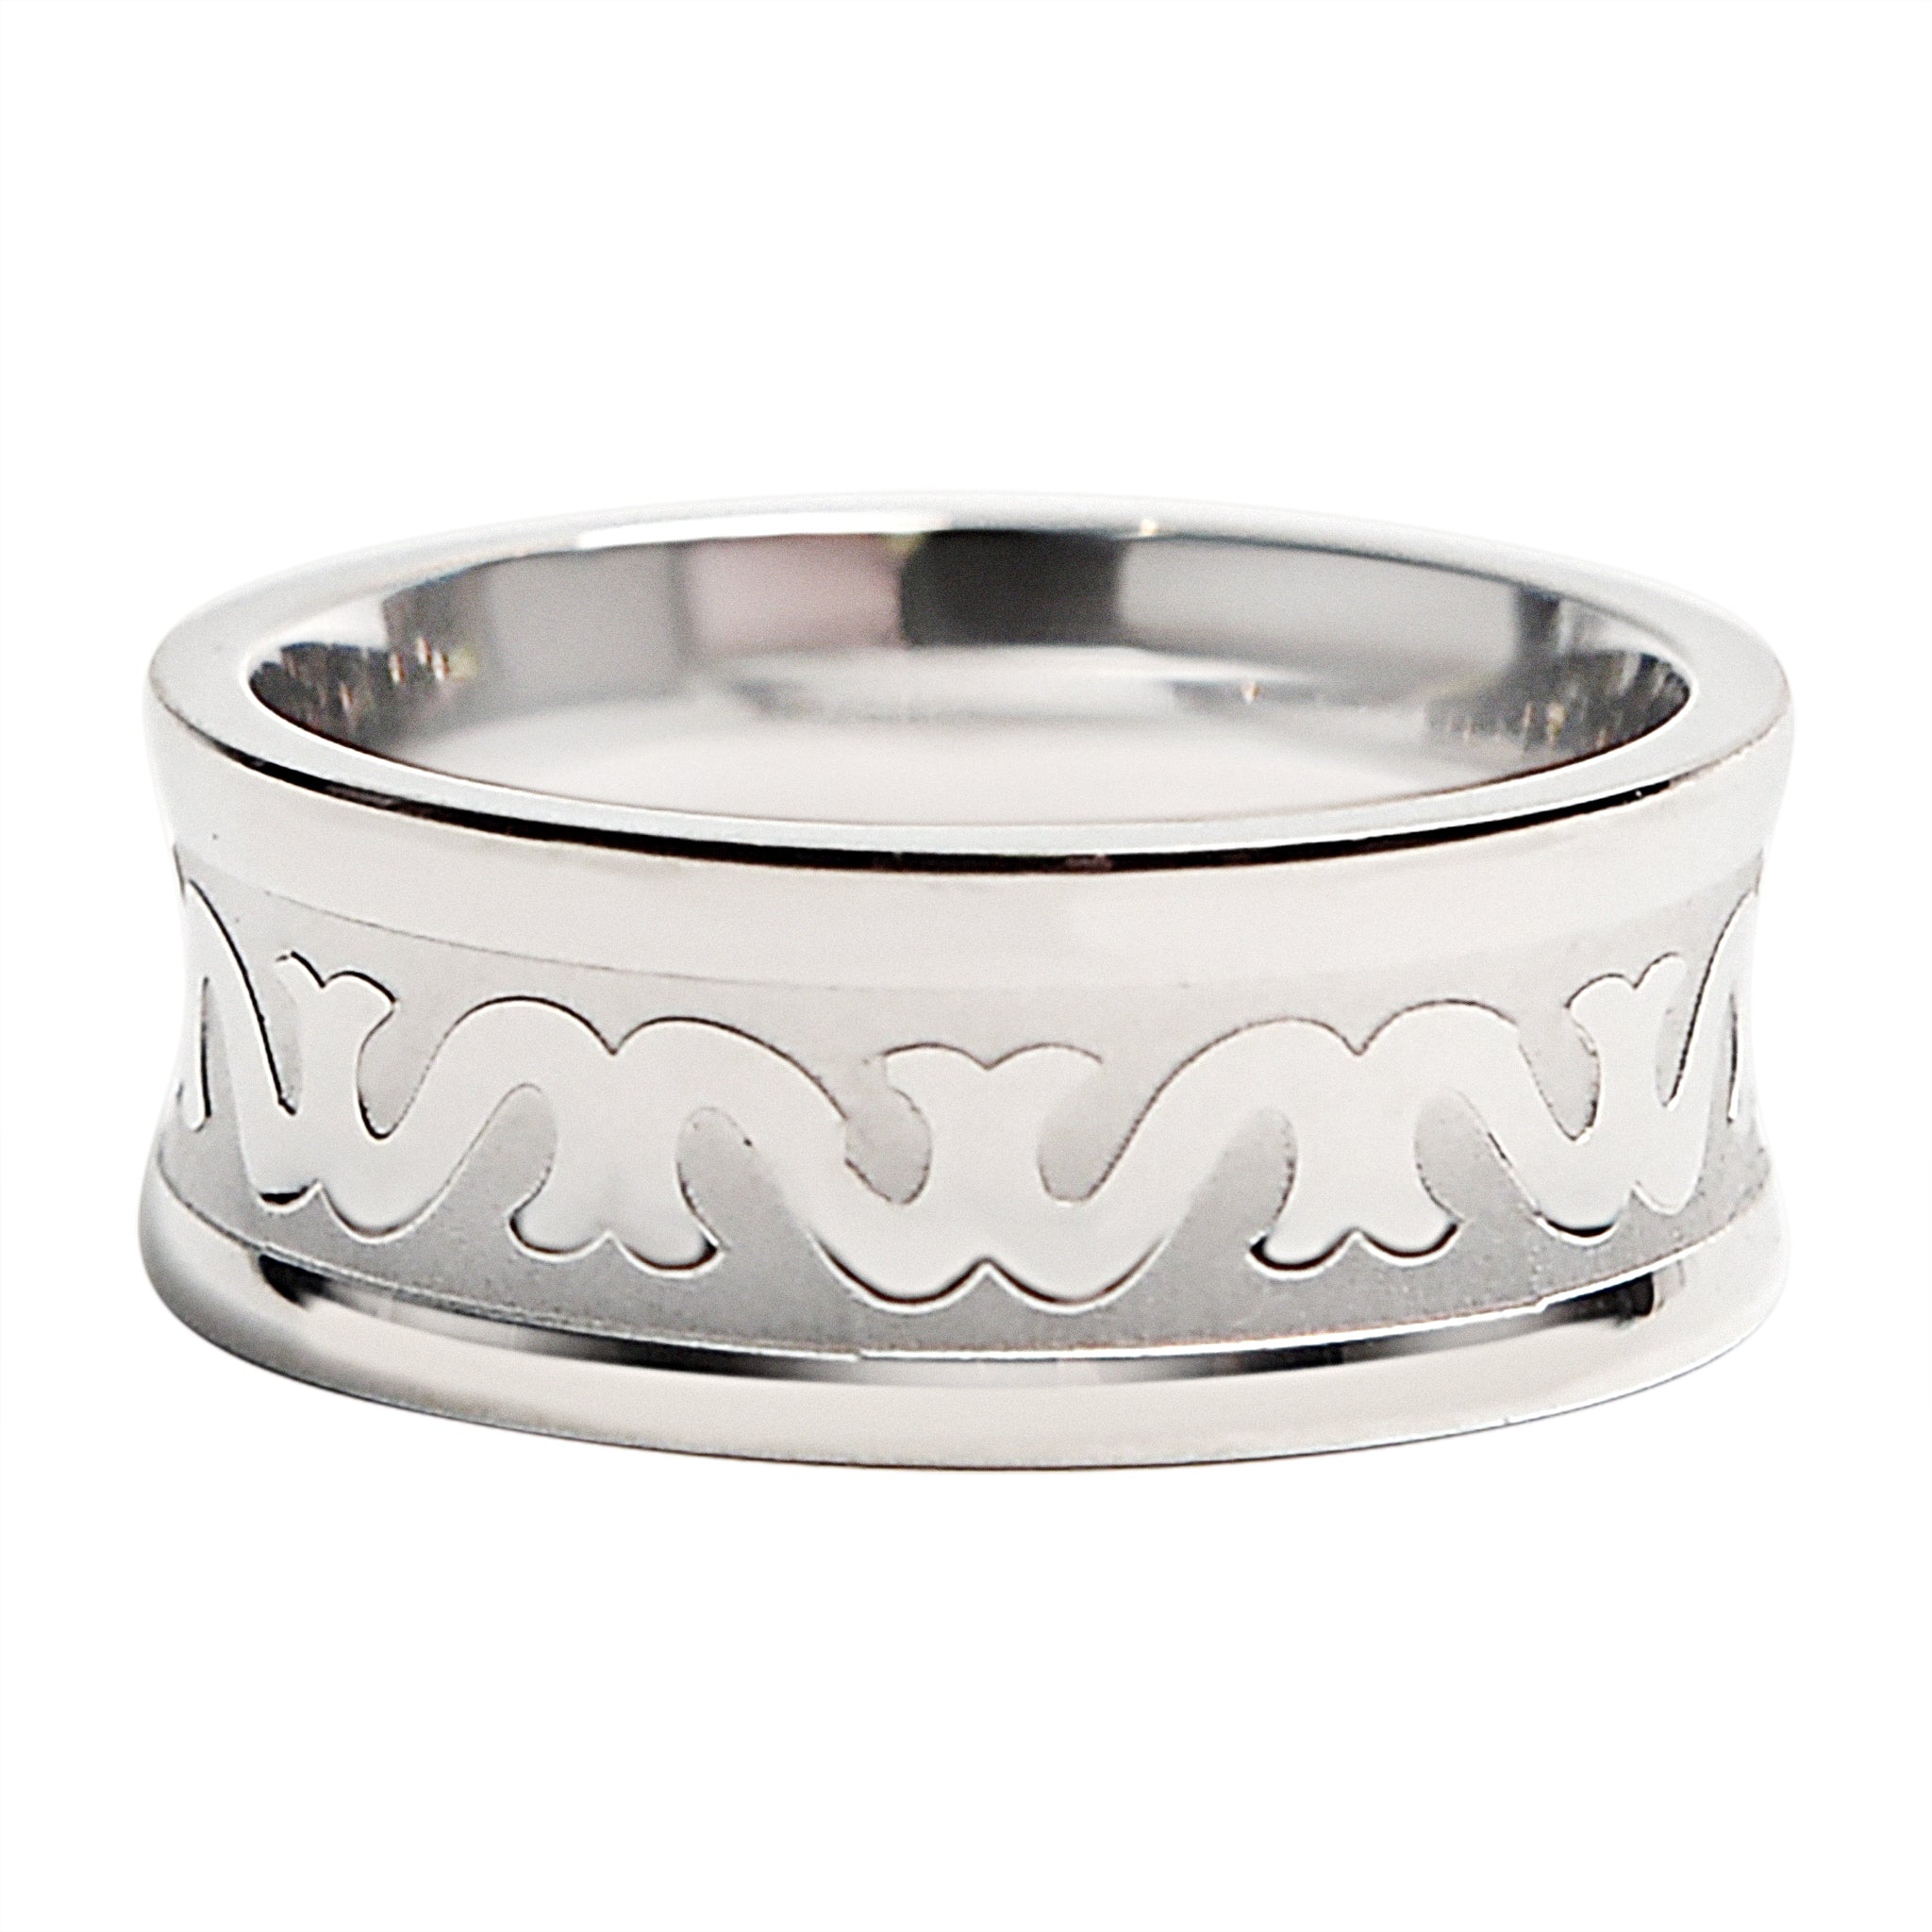 Stainless Steel Grooved Filigree Center Ring / NCZ0145